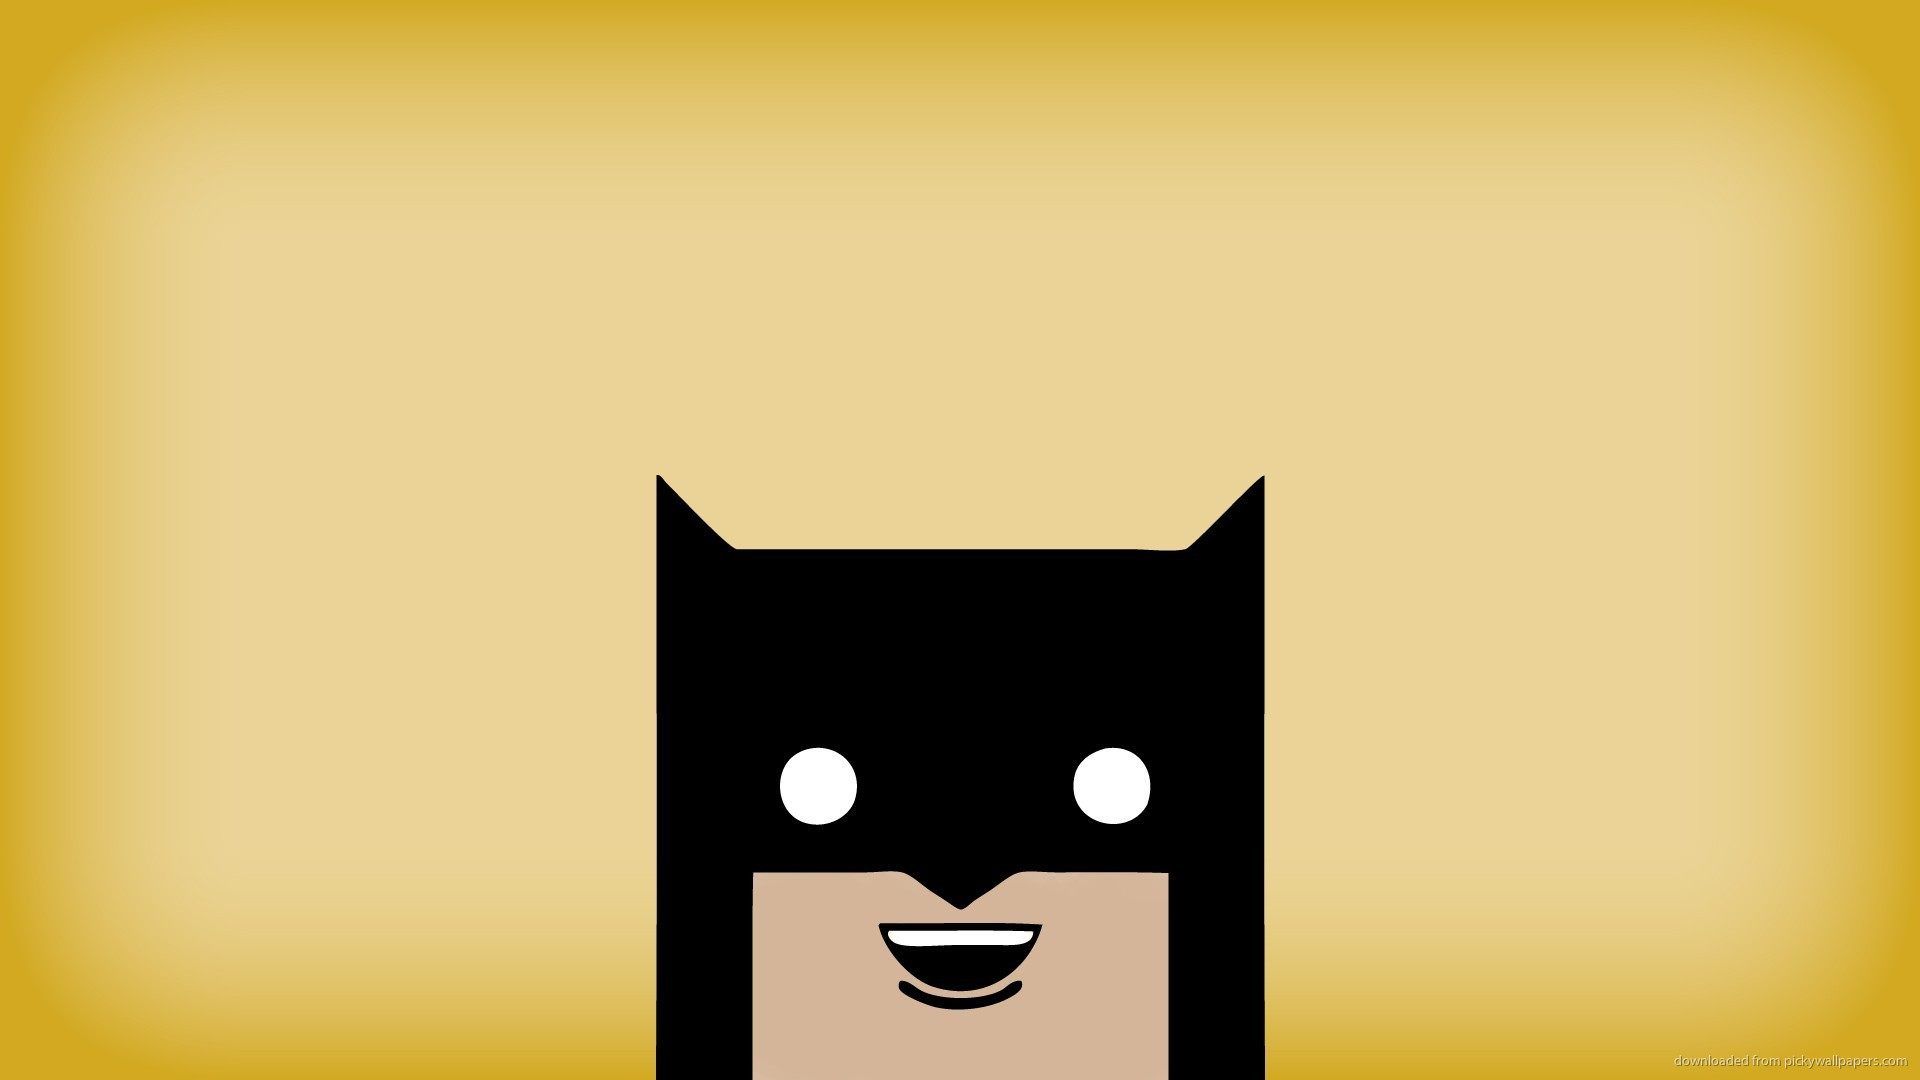 Wallpapers Funny Pictures Gallery - Batman Logo On Yellow Background -  1920x1080 Wallpaper 